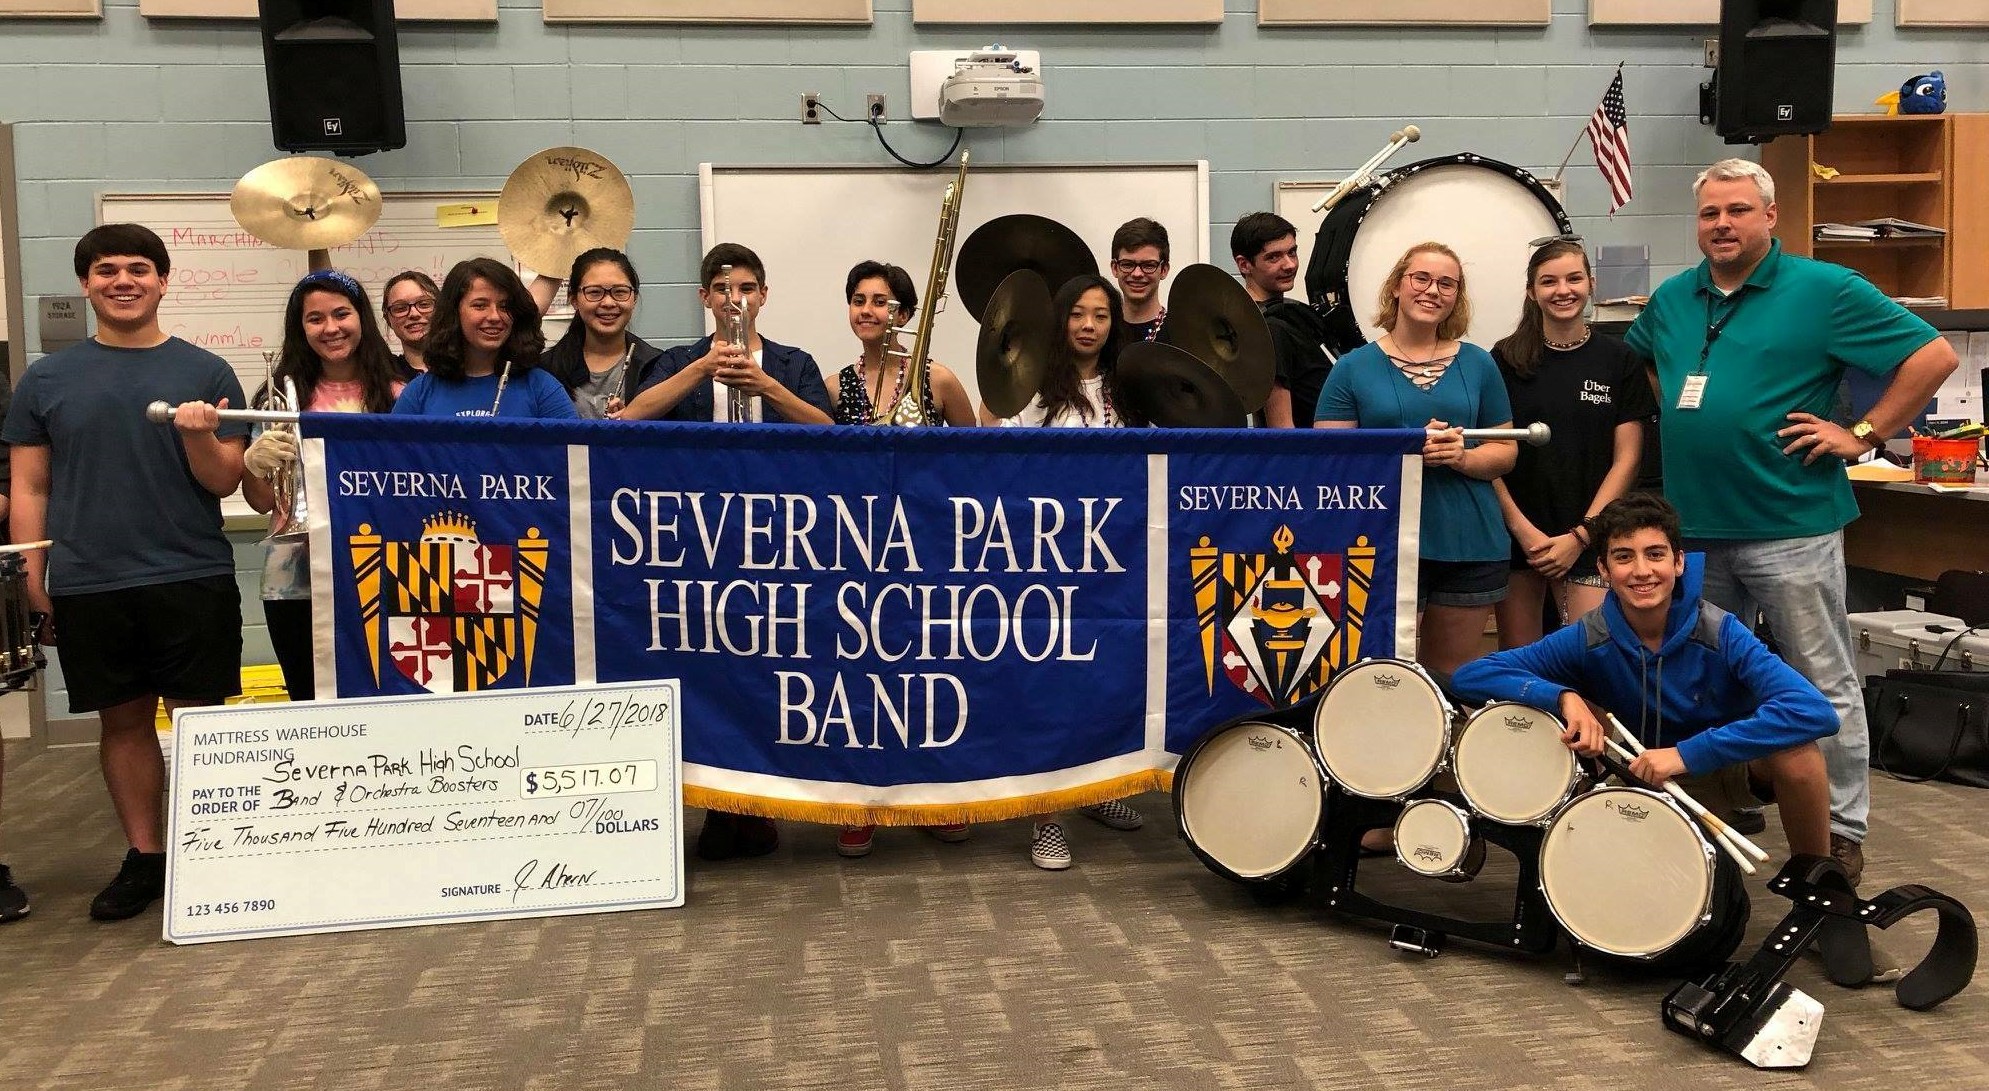 Mr. Kilby standing with the Severna Park High School Band.